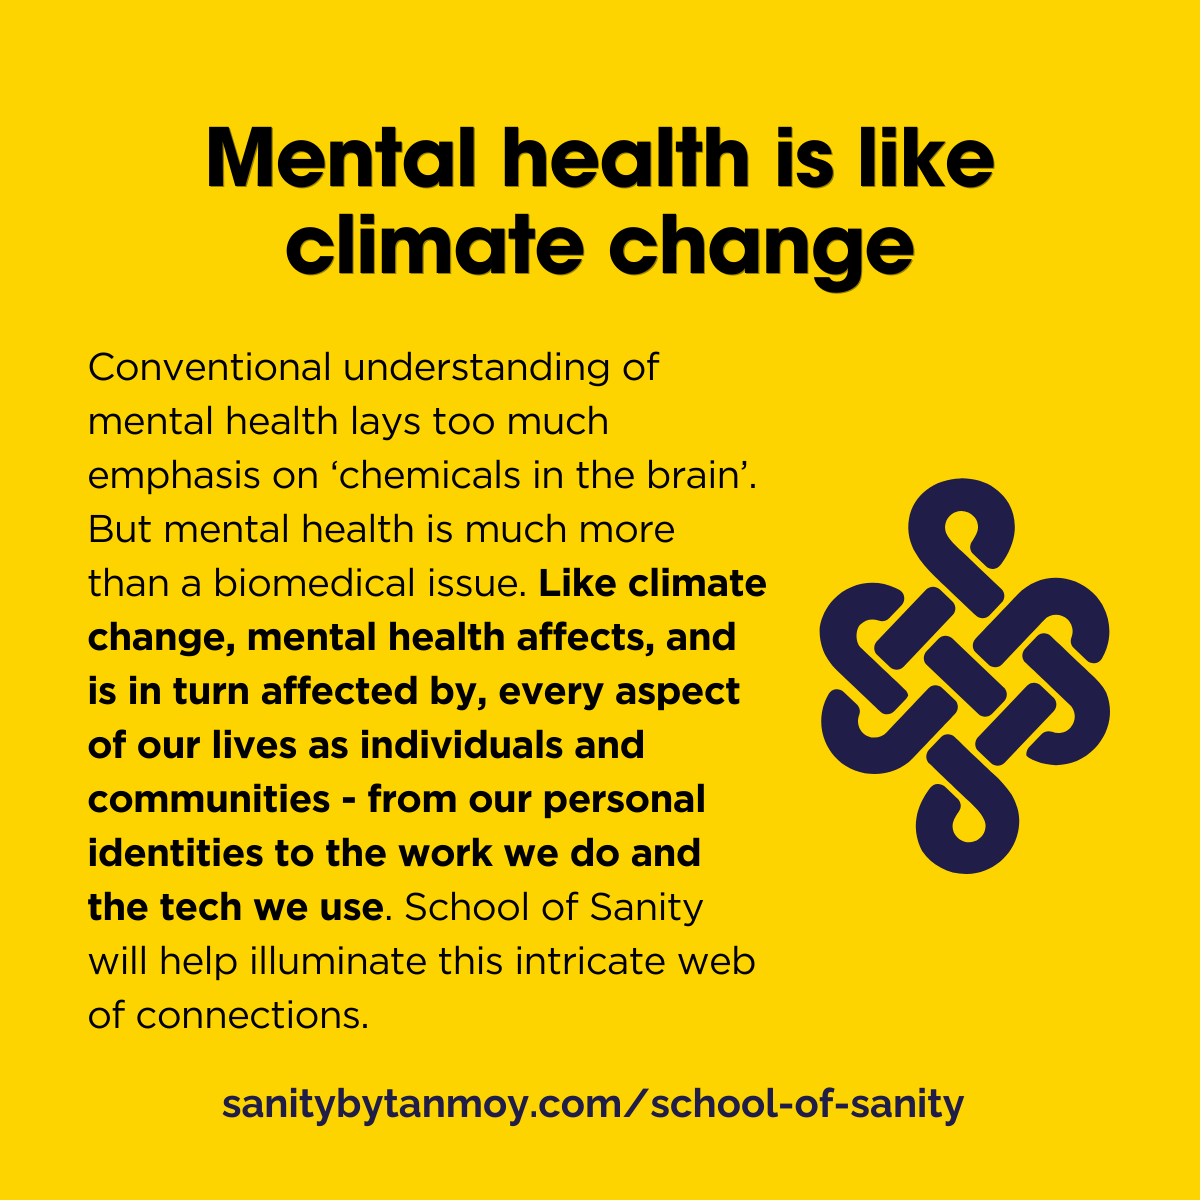 Graphic titled 'mental health is like climate change'. Next to an infinity sign sits the text: "Conventional understanding of mental health lays too much emphasis on ‘chemicals in the brain’. But mental health is much more than a biomedical issue. Like climate change, mental health affects, and is in turn affected by, every aspect of our lives as individuals and communities - from our personal identities to the work we do and the tech we use. School of Sanity will help illuminate this intricate web of connections."